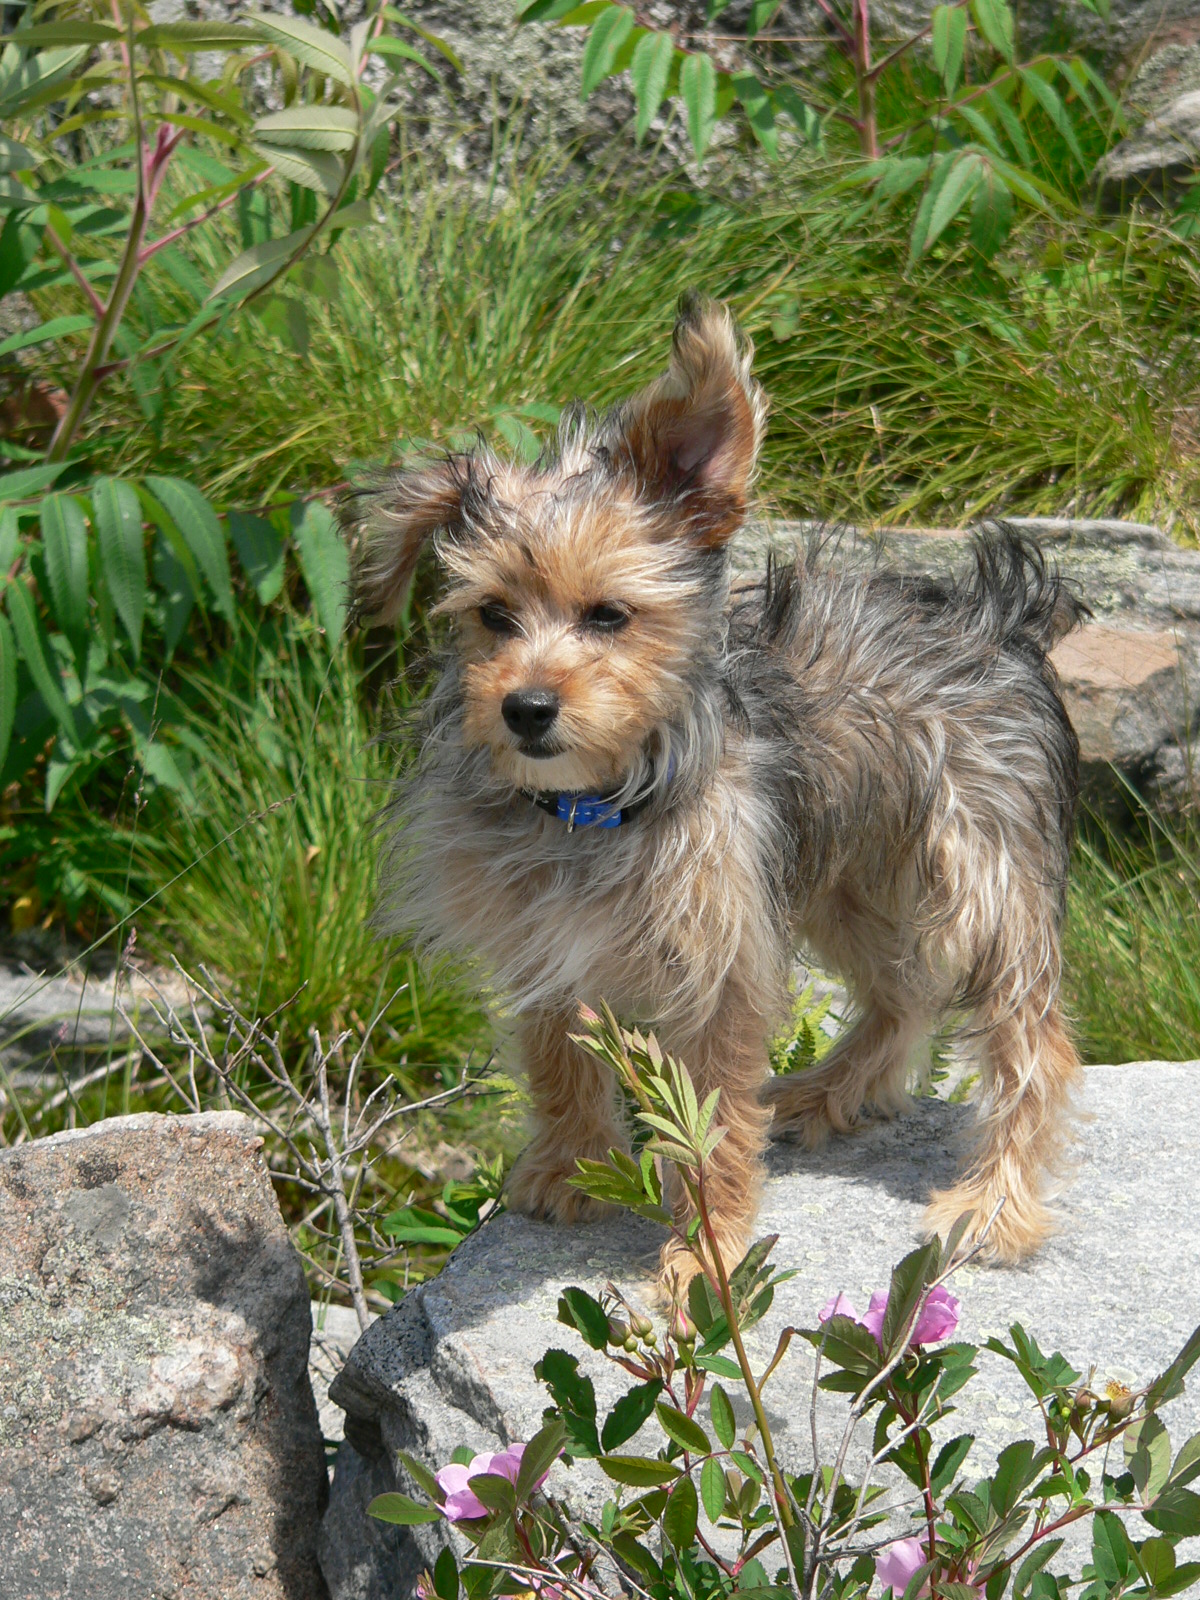 a small dog with a blue collar standing on rocks